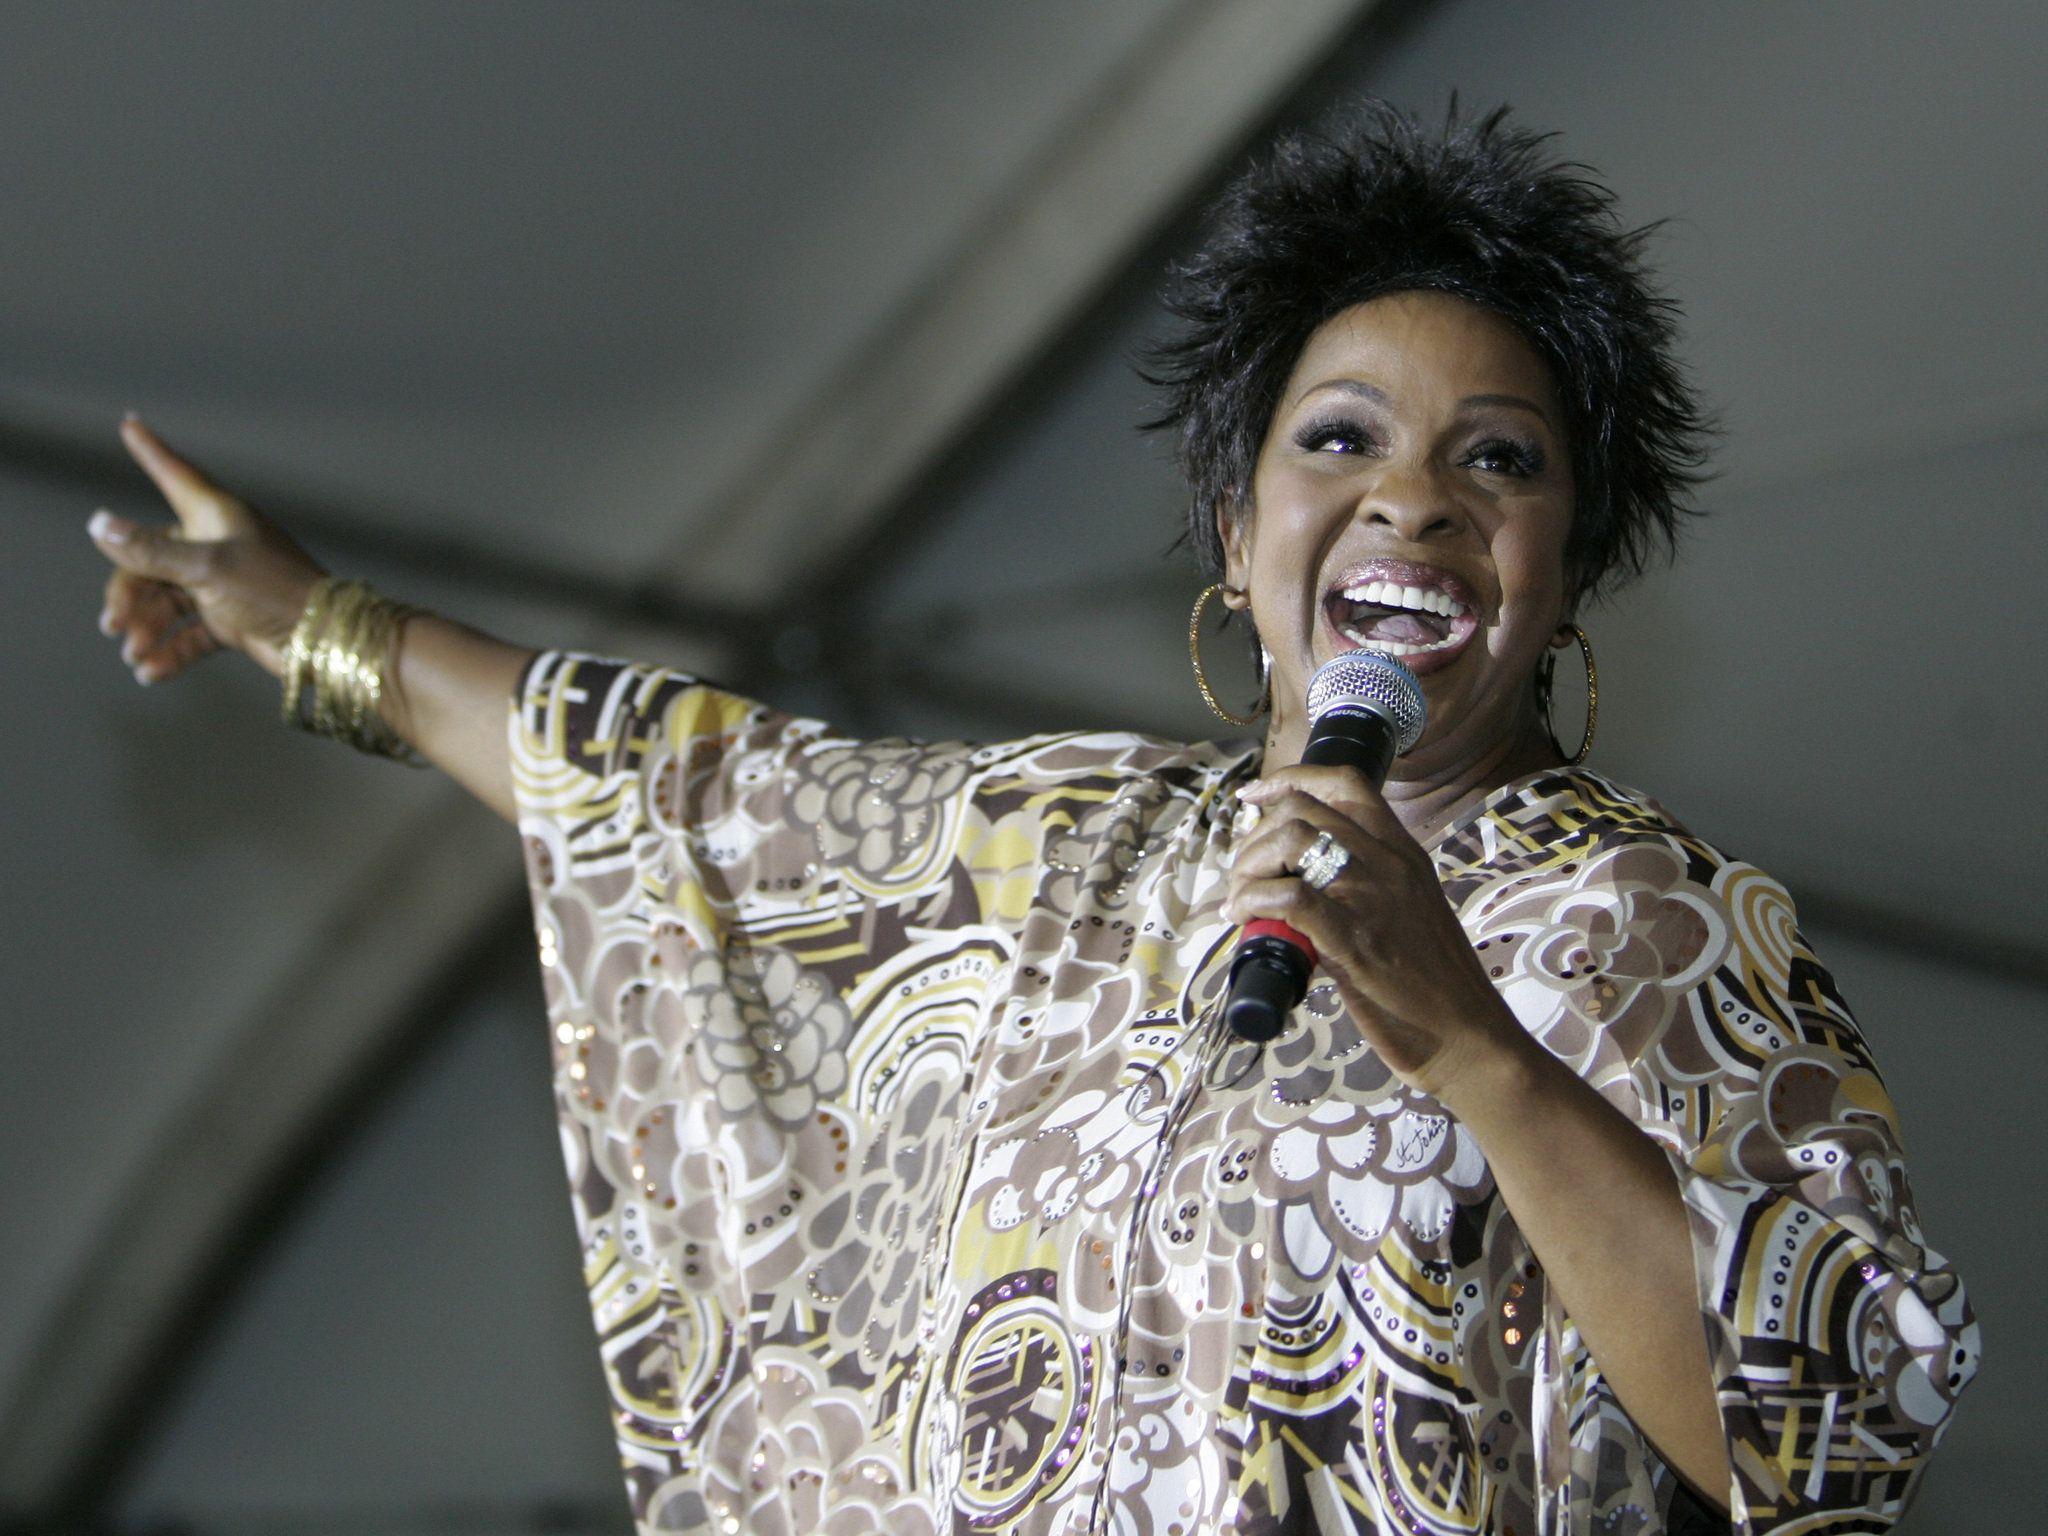 Gladys Knight taking stage with The O'Jays at Sands Bethlehem Event